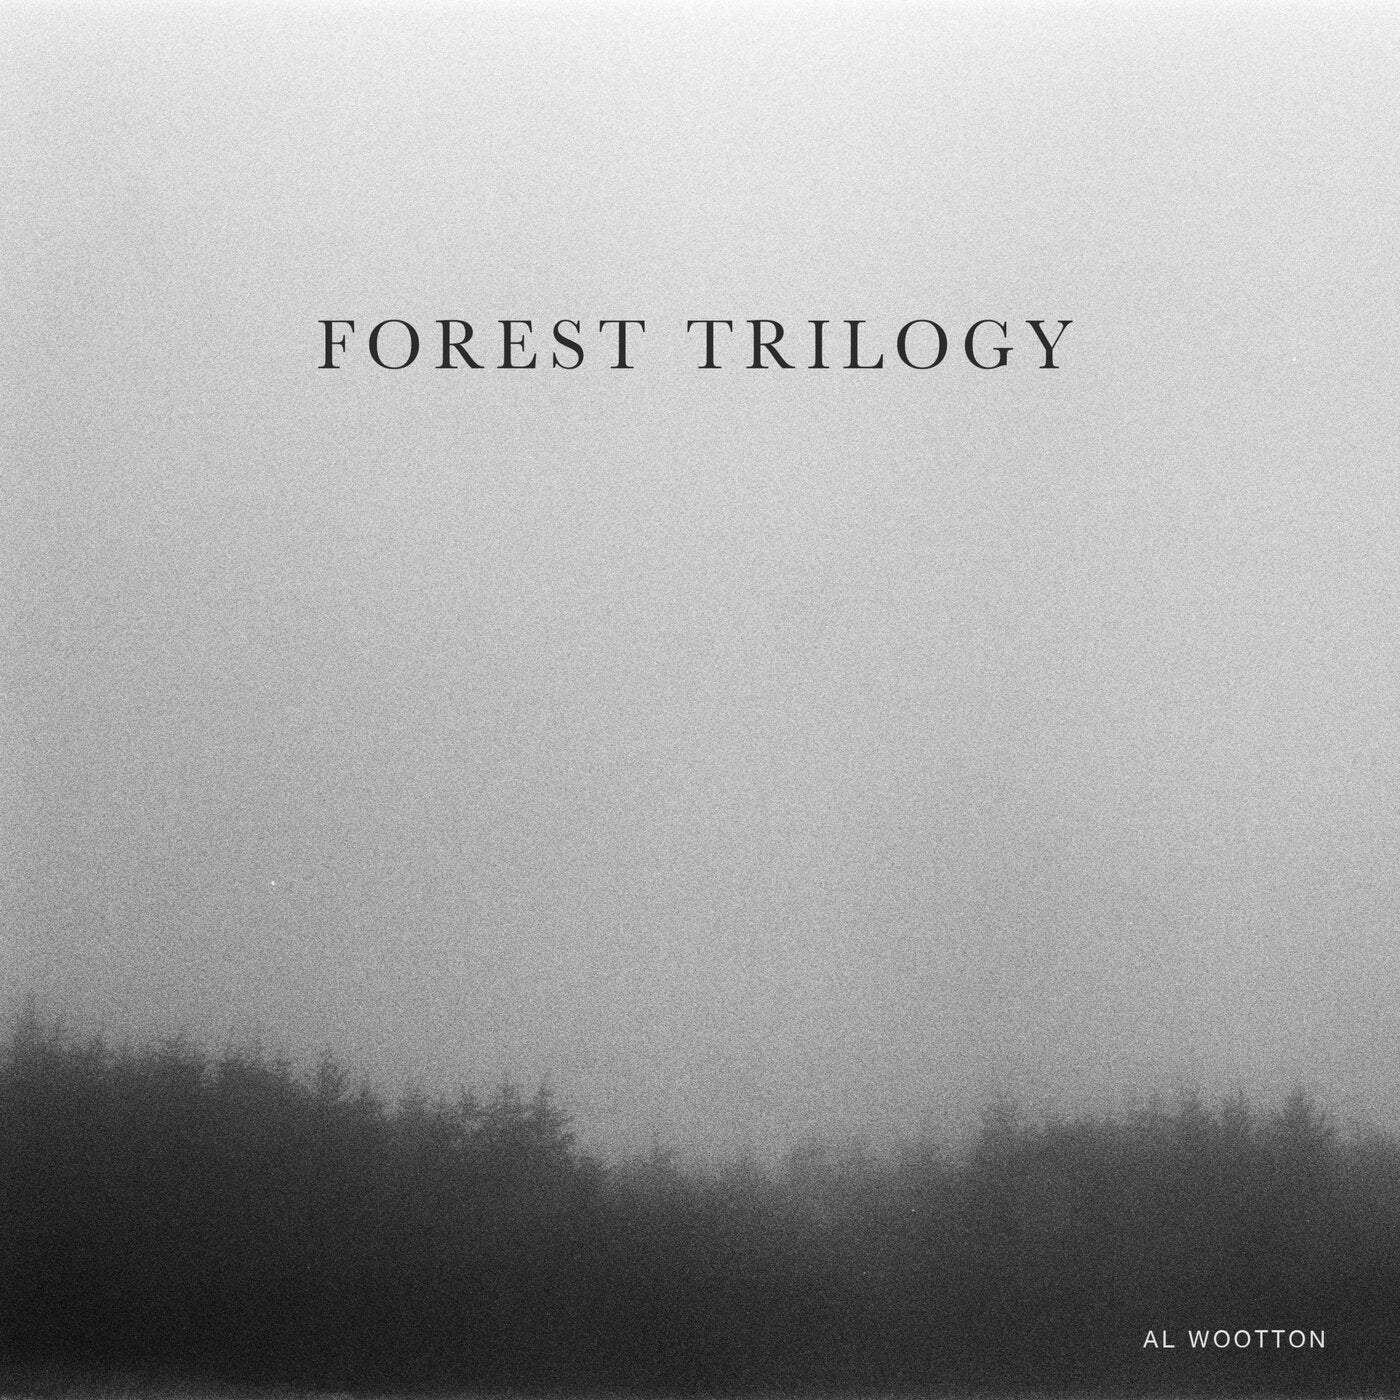 Download Al Wootton - Forest Trilogy on Electrobuzz